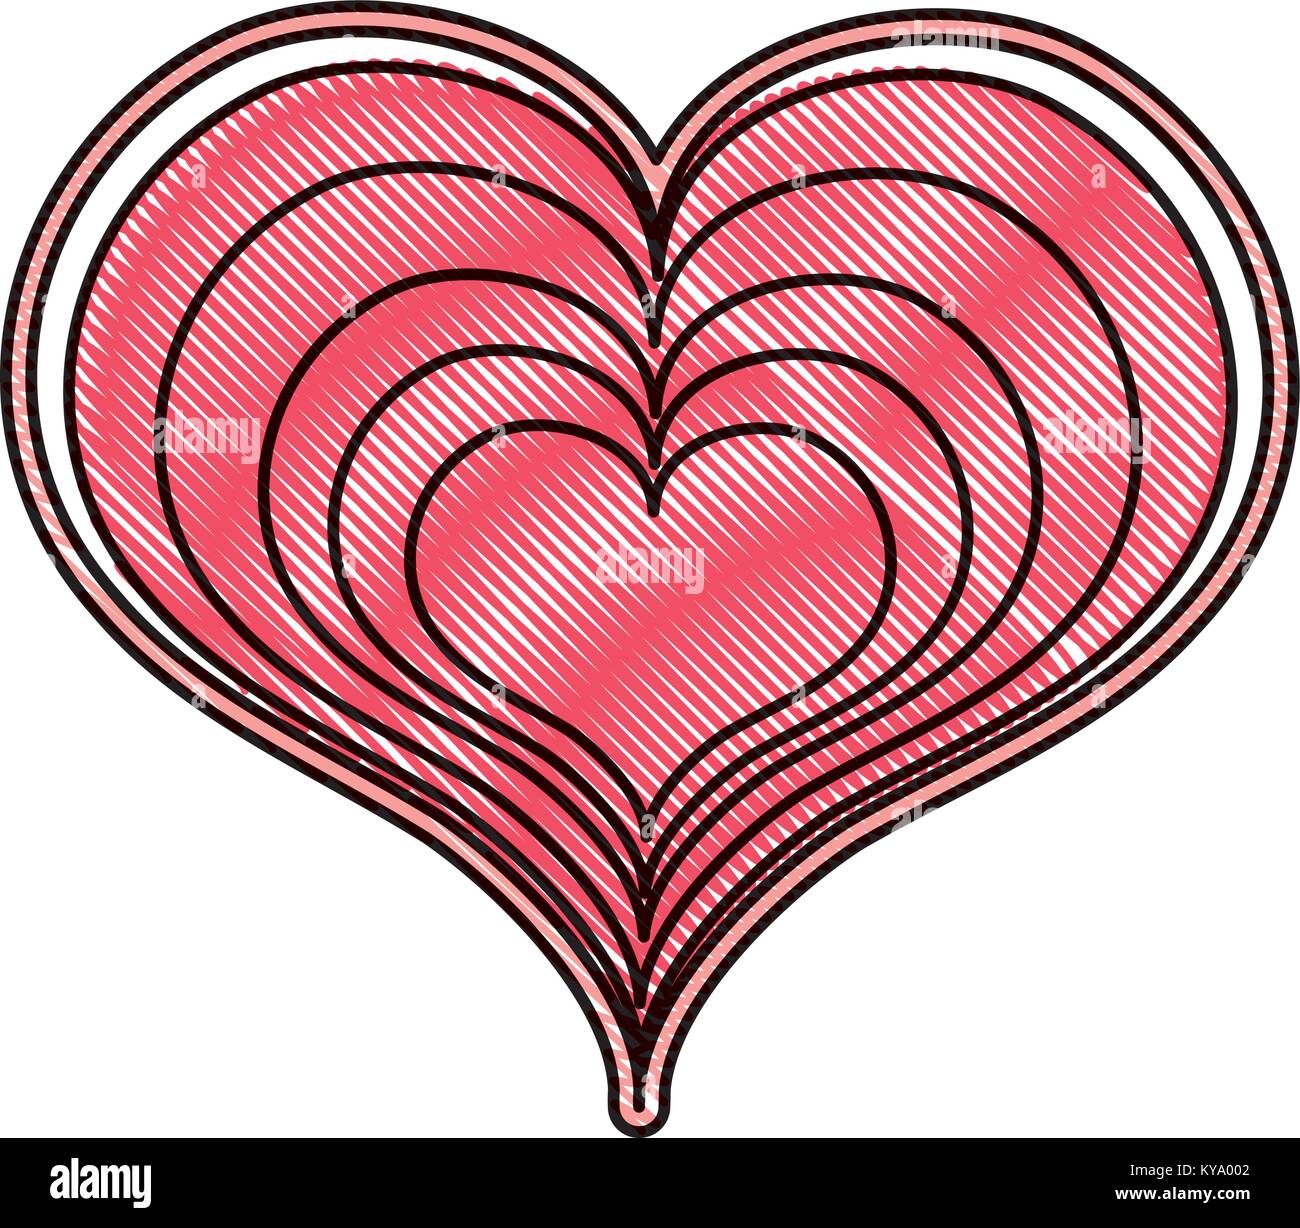 grated heart love with engraving design decoration Stock Vector